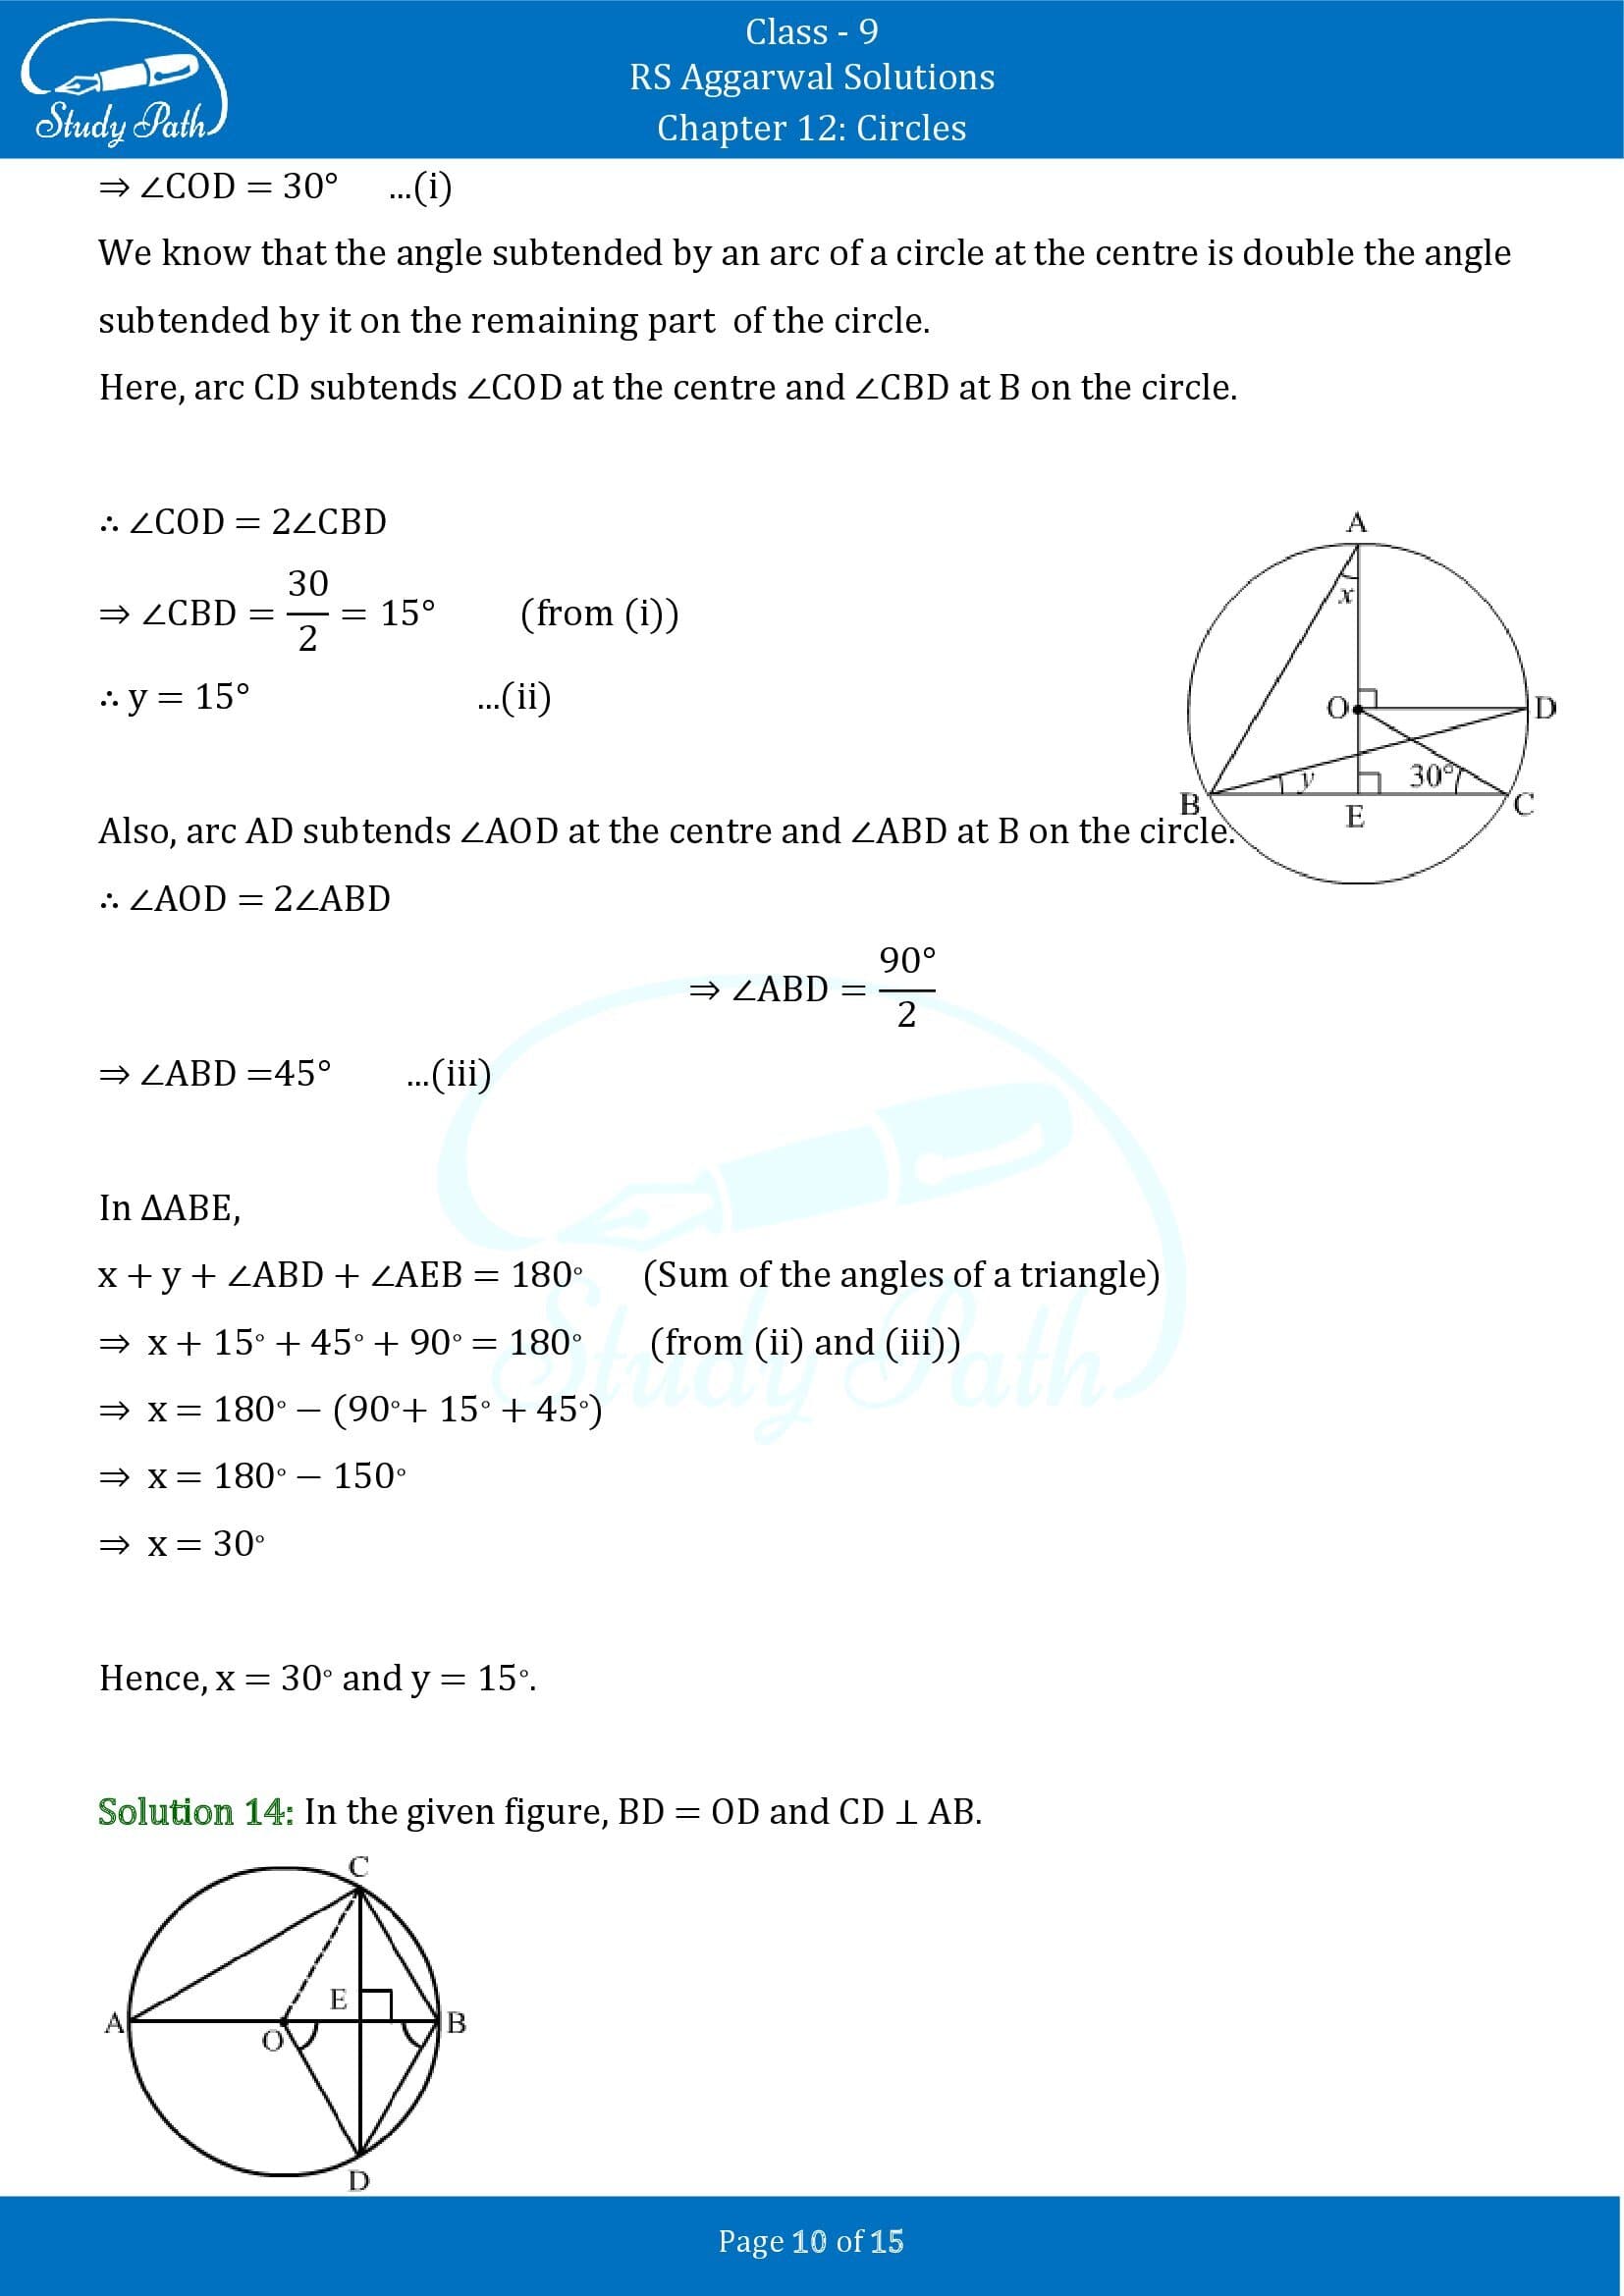 RS Aggarwal Solutions Class 9 Chapter 12 Circles Exercise 12B 00010